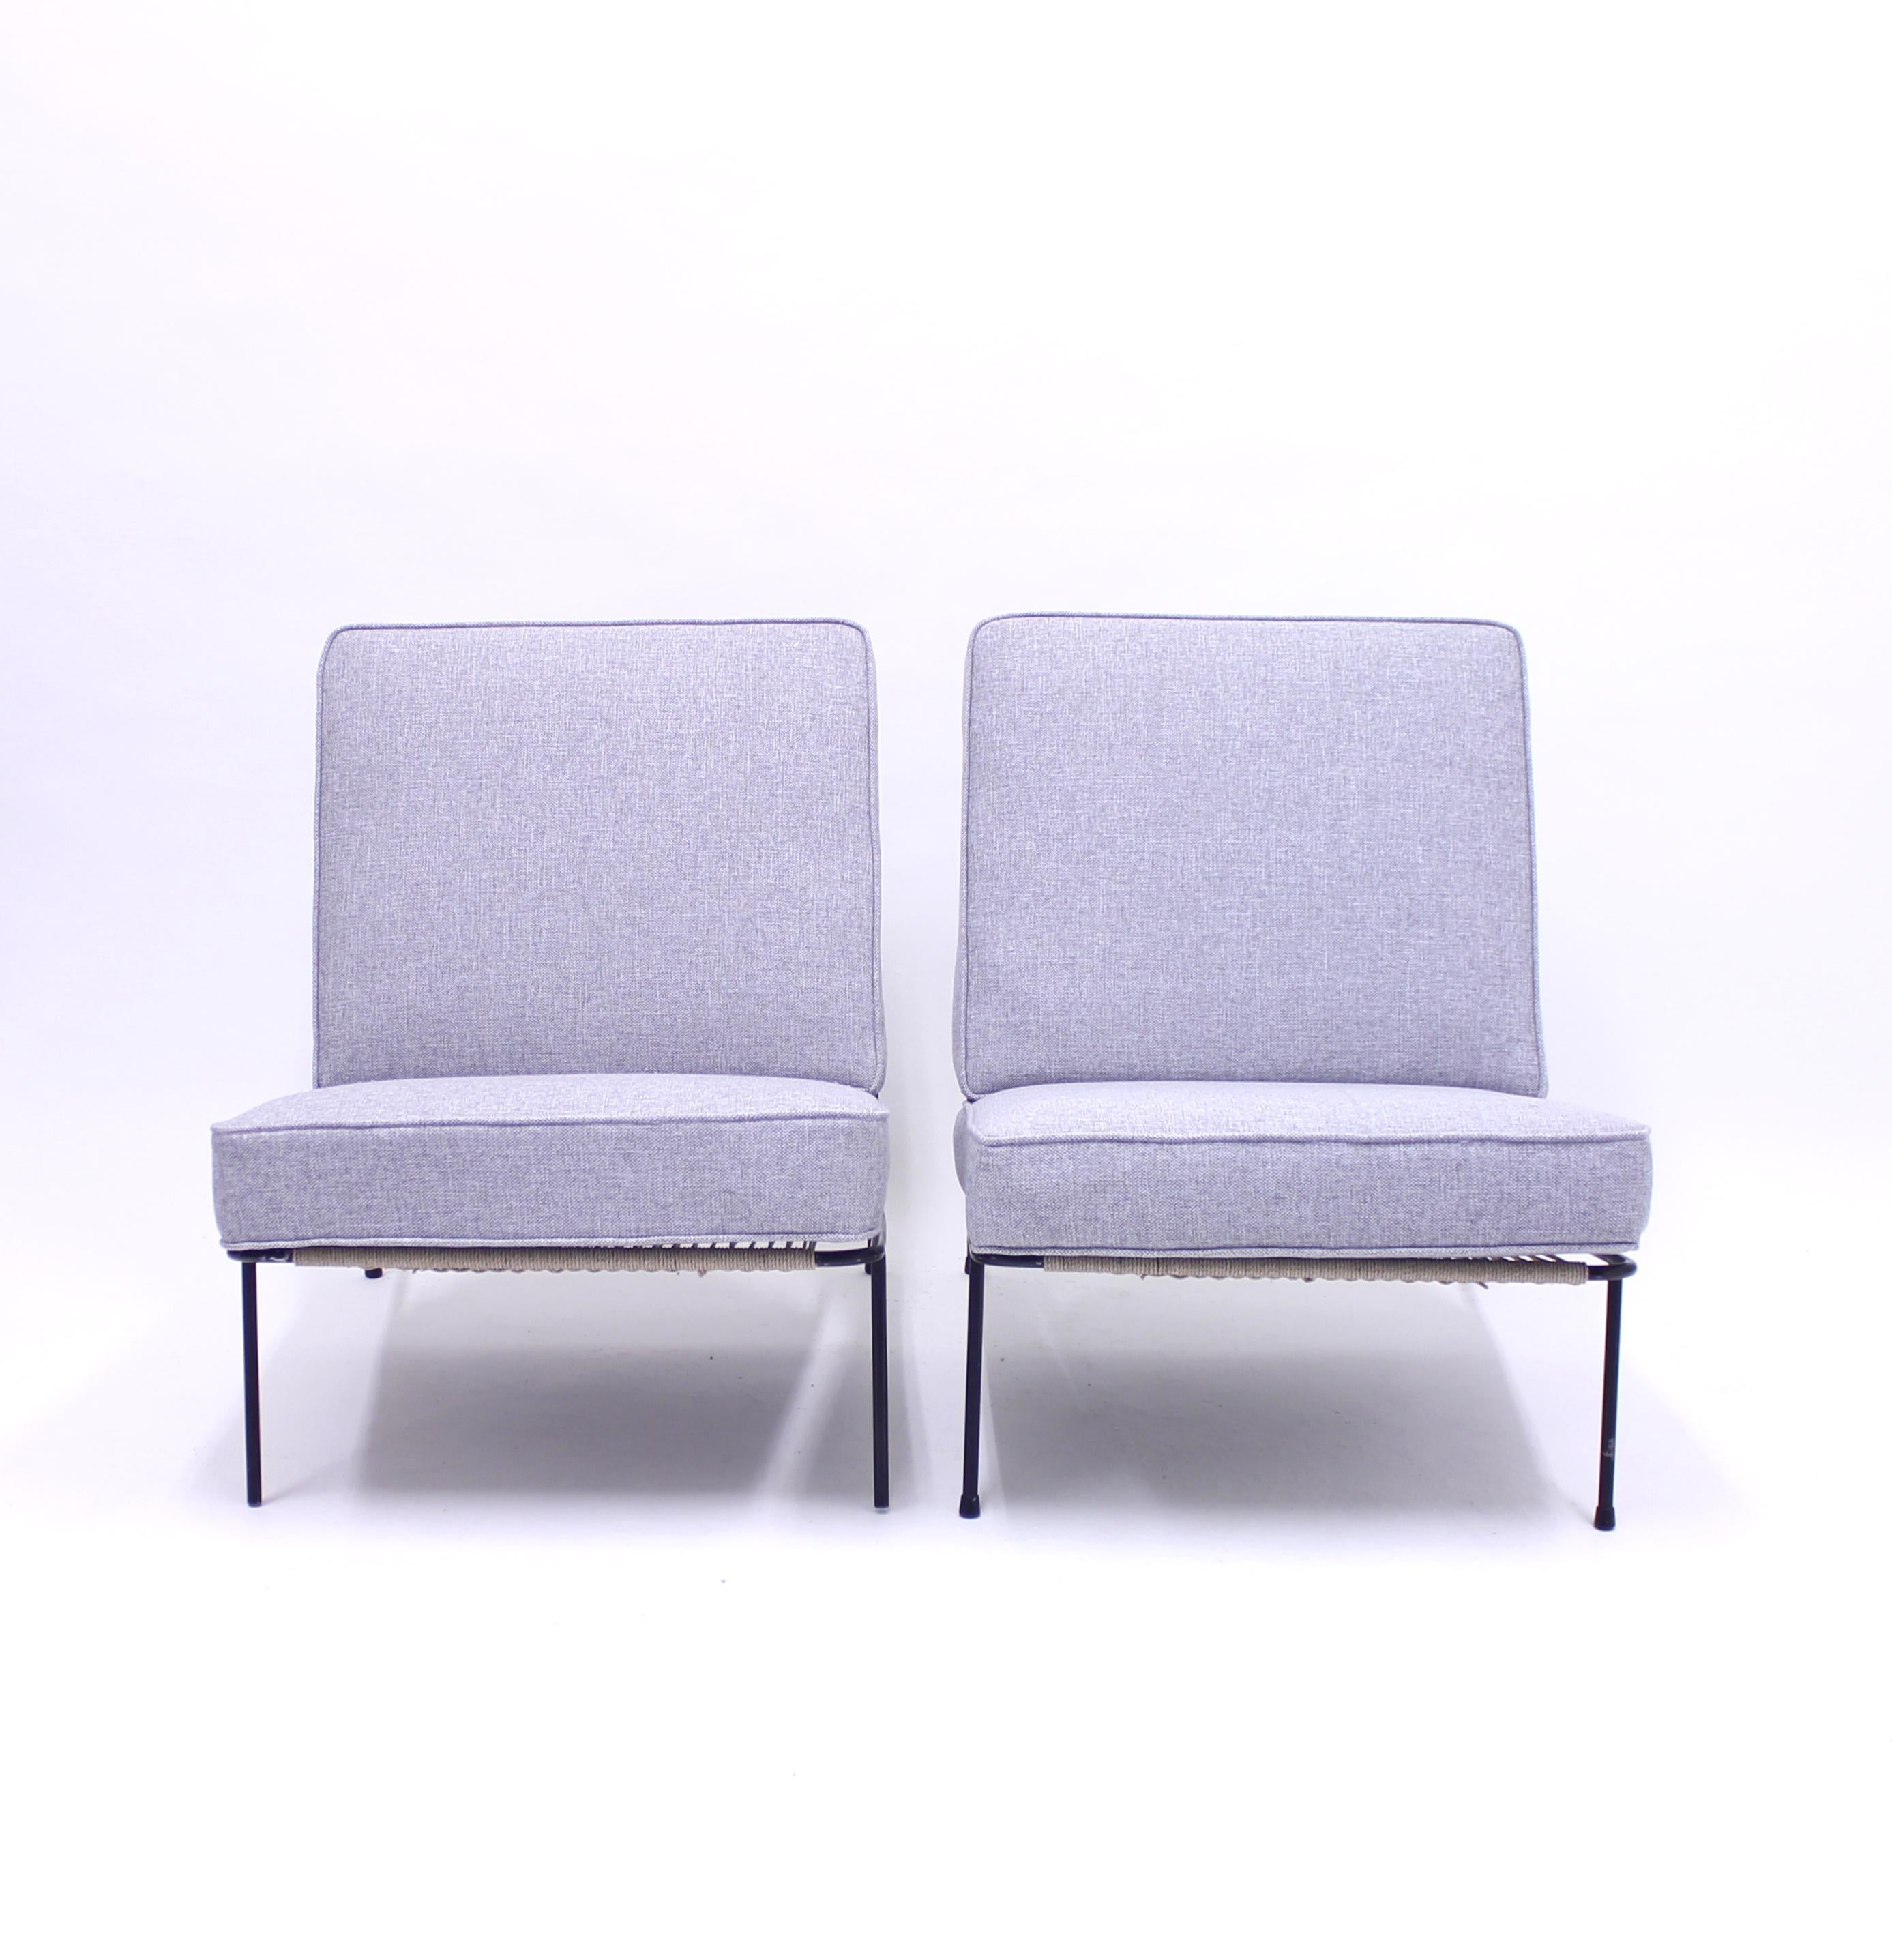 Steel Alf Svensson, Pair of Domus Lounge Chairs, DUX, 1950s For Sale